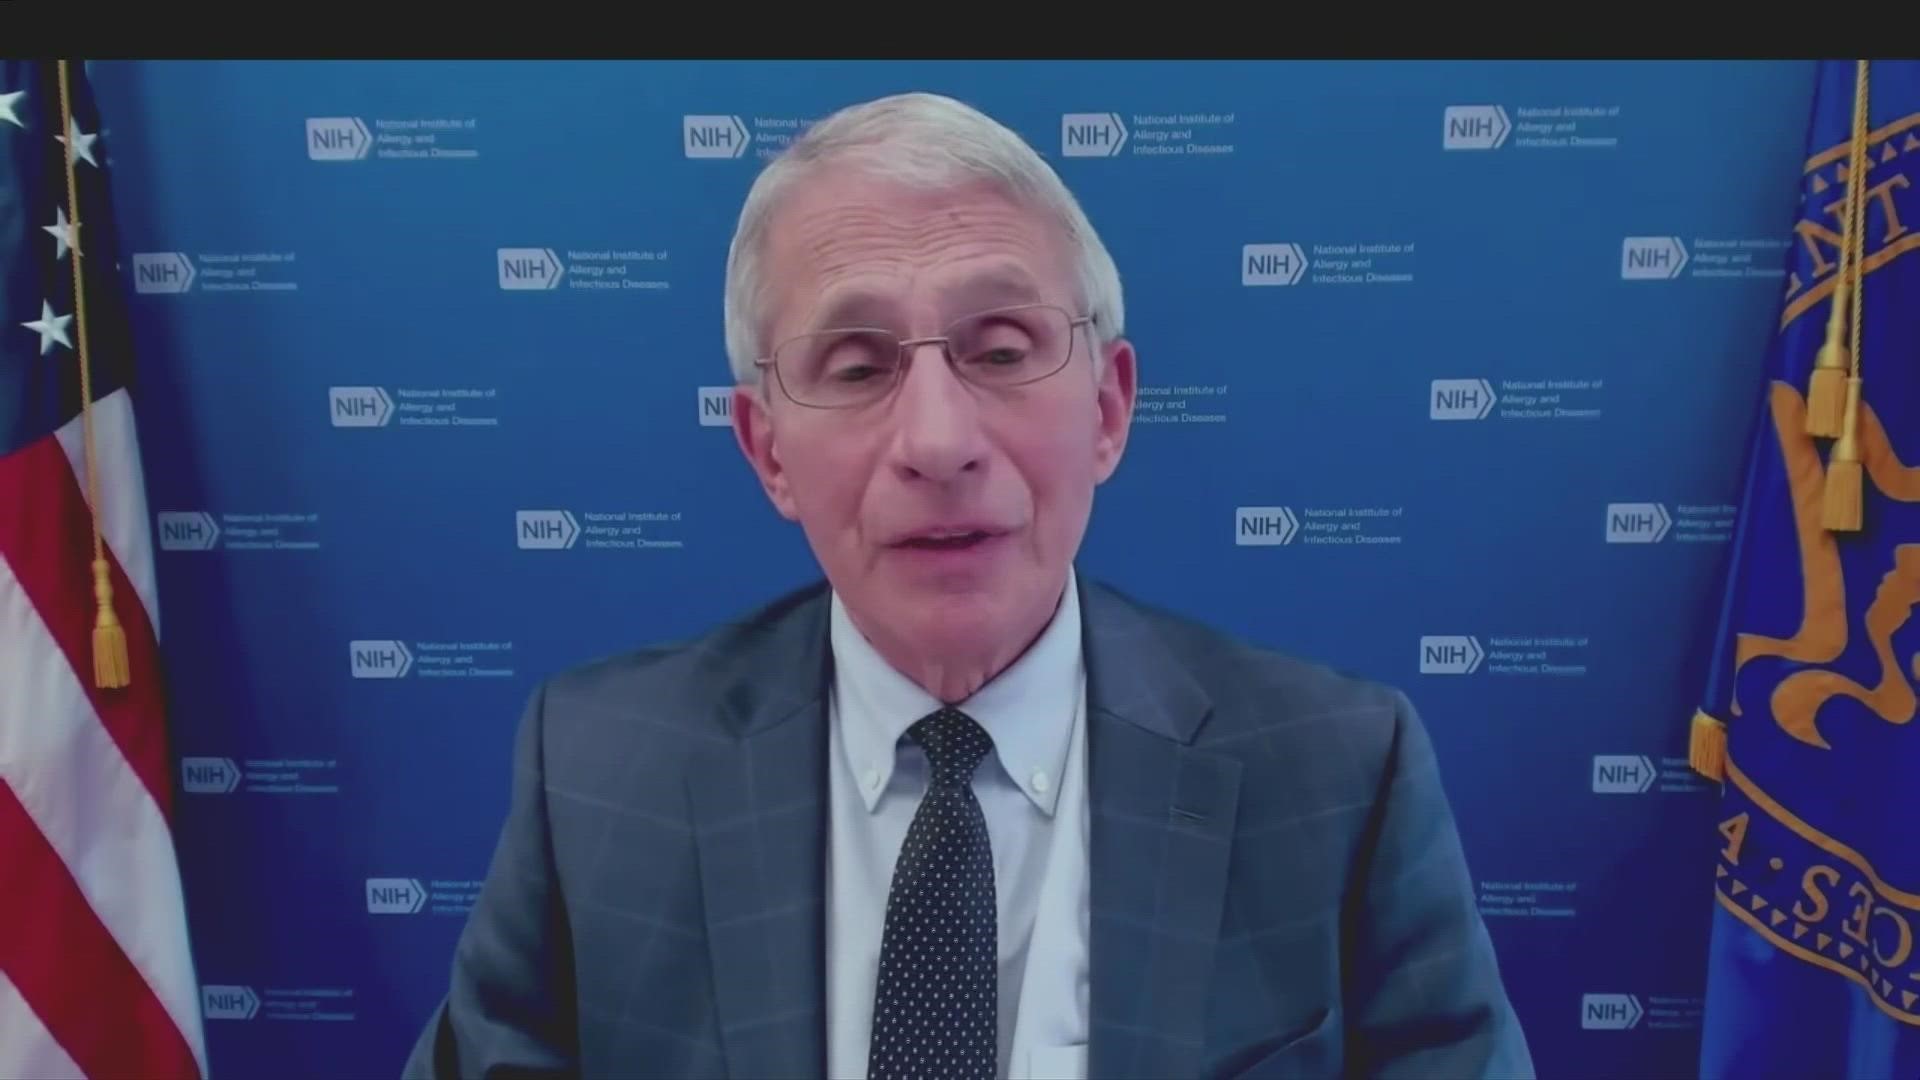 Dr. Anthony Fauci explained Tuesday that it will still be a few weeks before health officials know the severity of omicron COVID-19 cases.